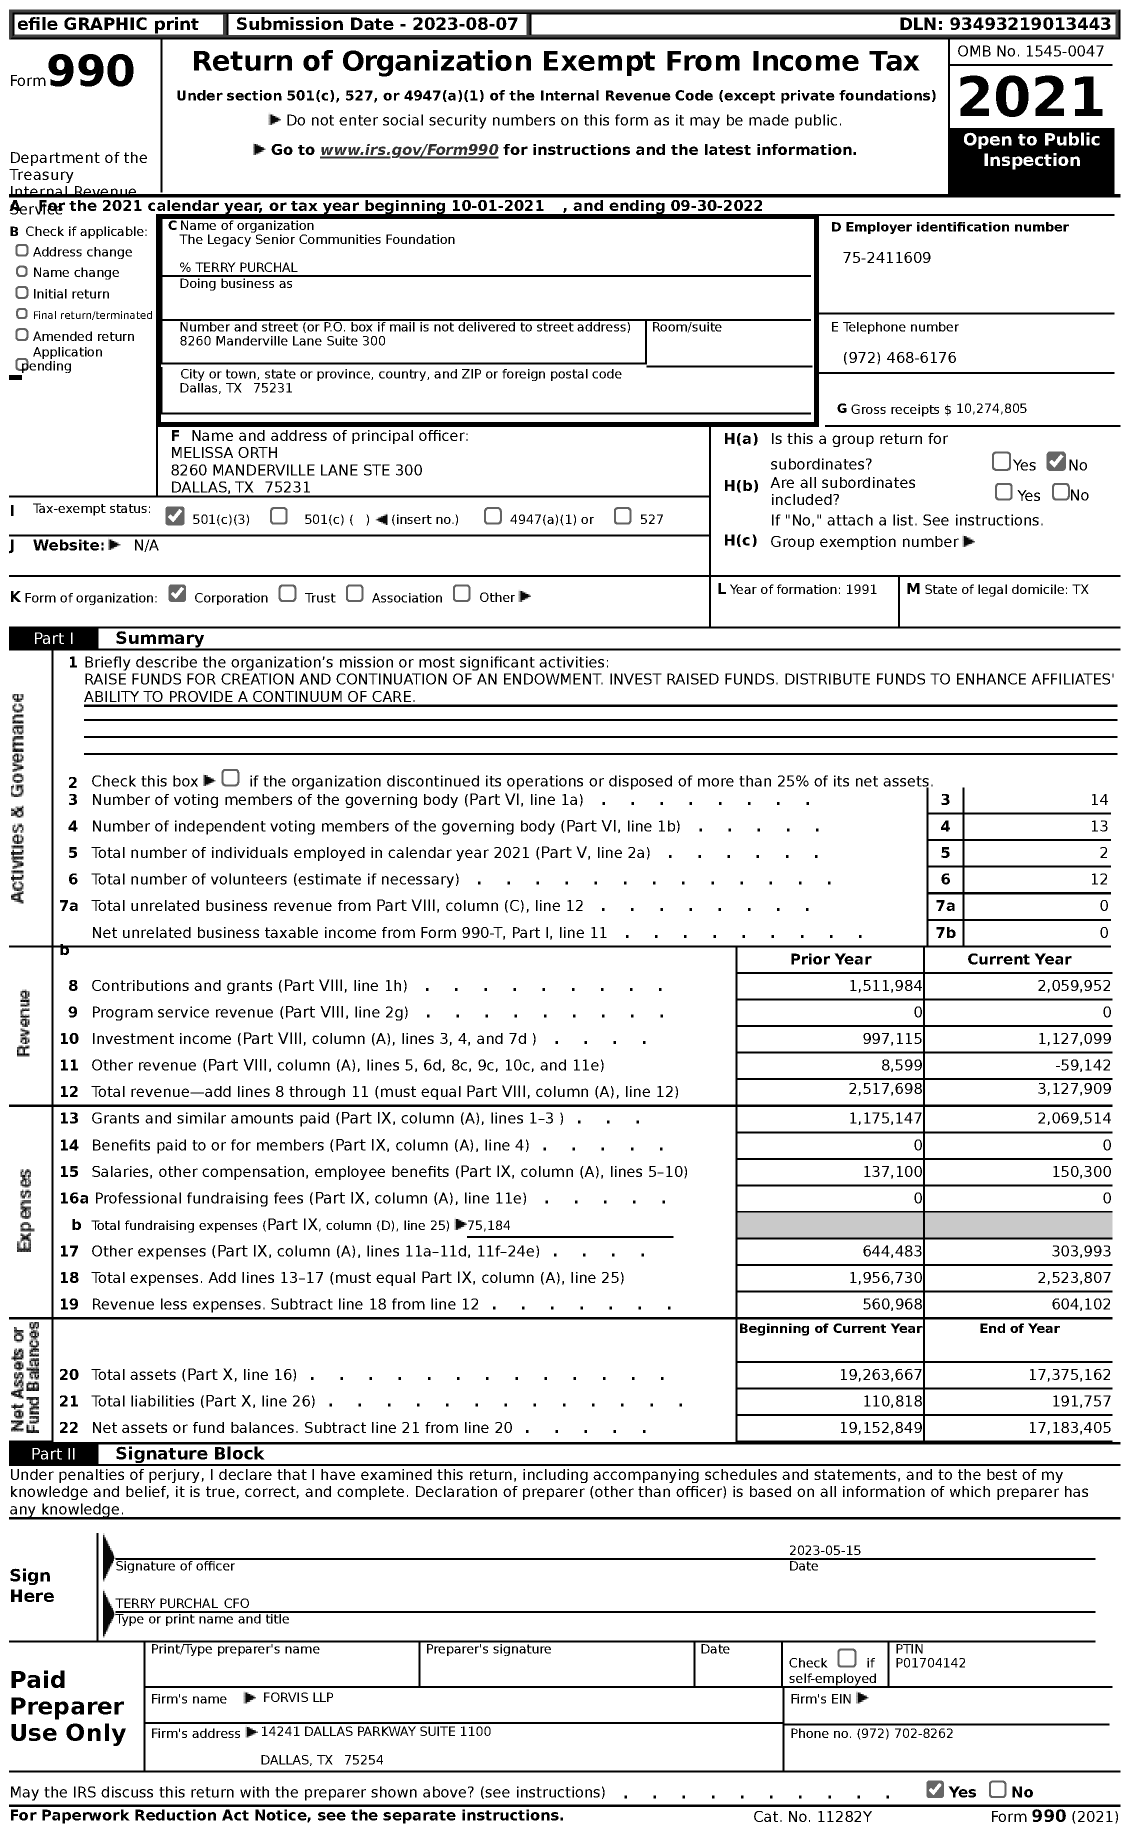 Image of first page of 2021 Form 990 for The Legacy Senior Communities Foundation